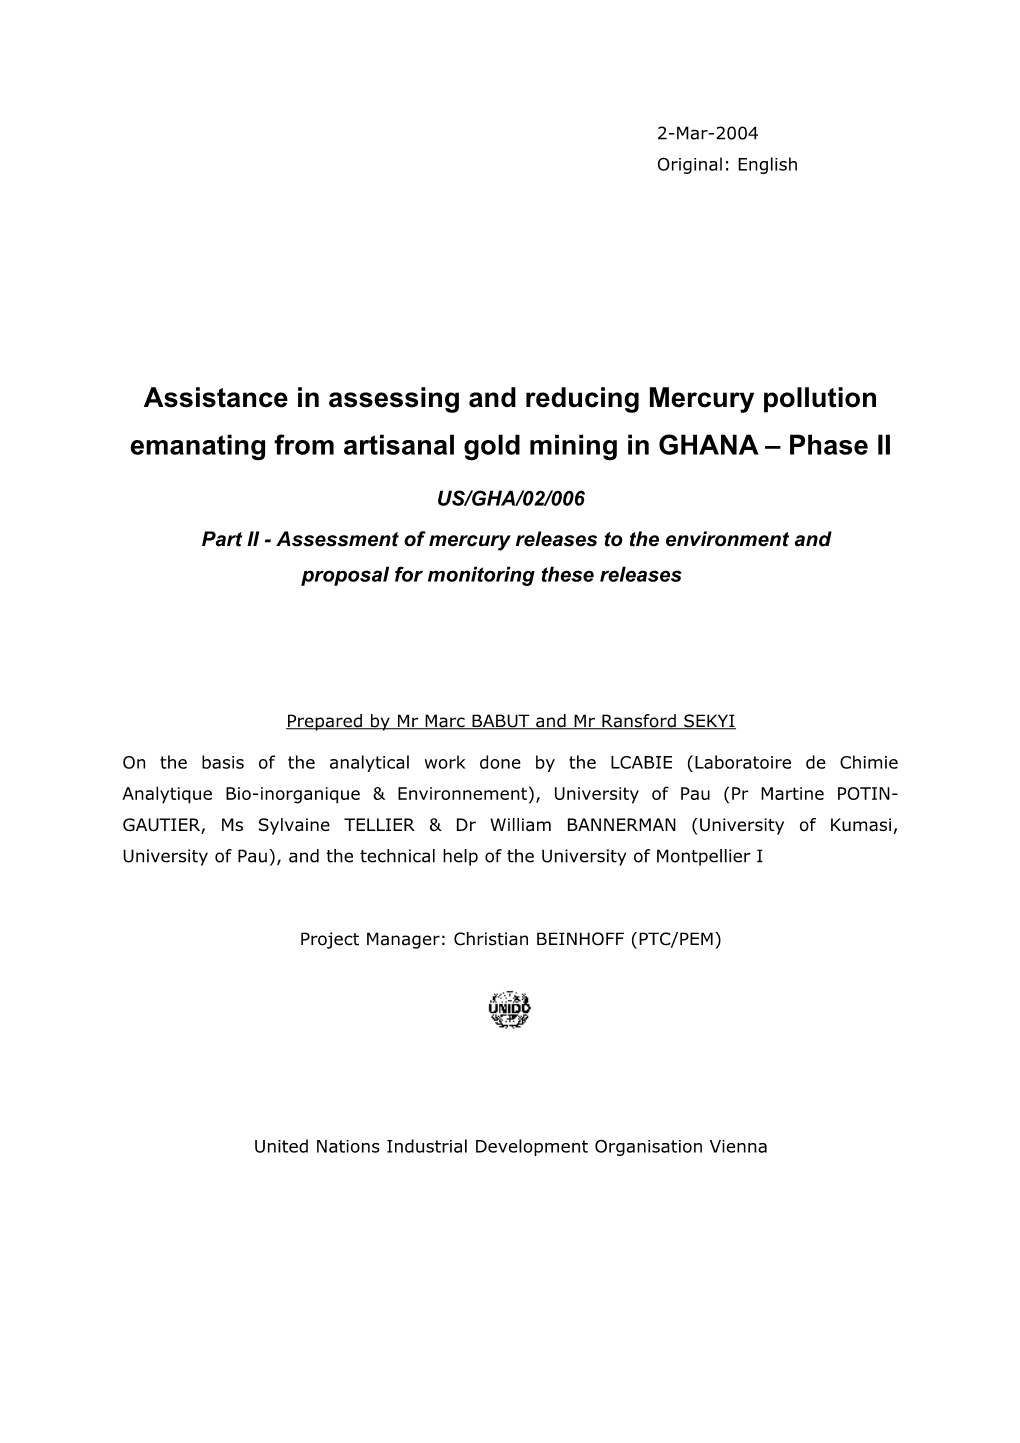 Assistance in Assessing and Reducing Mercury Pollution Emanating from Artisanal Gold Mining